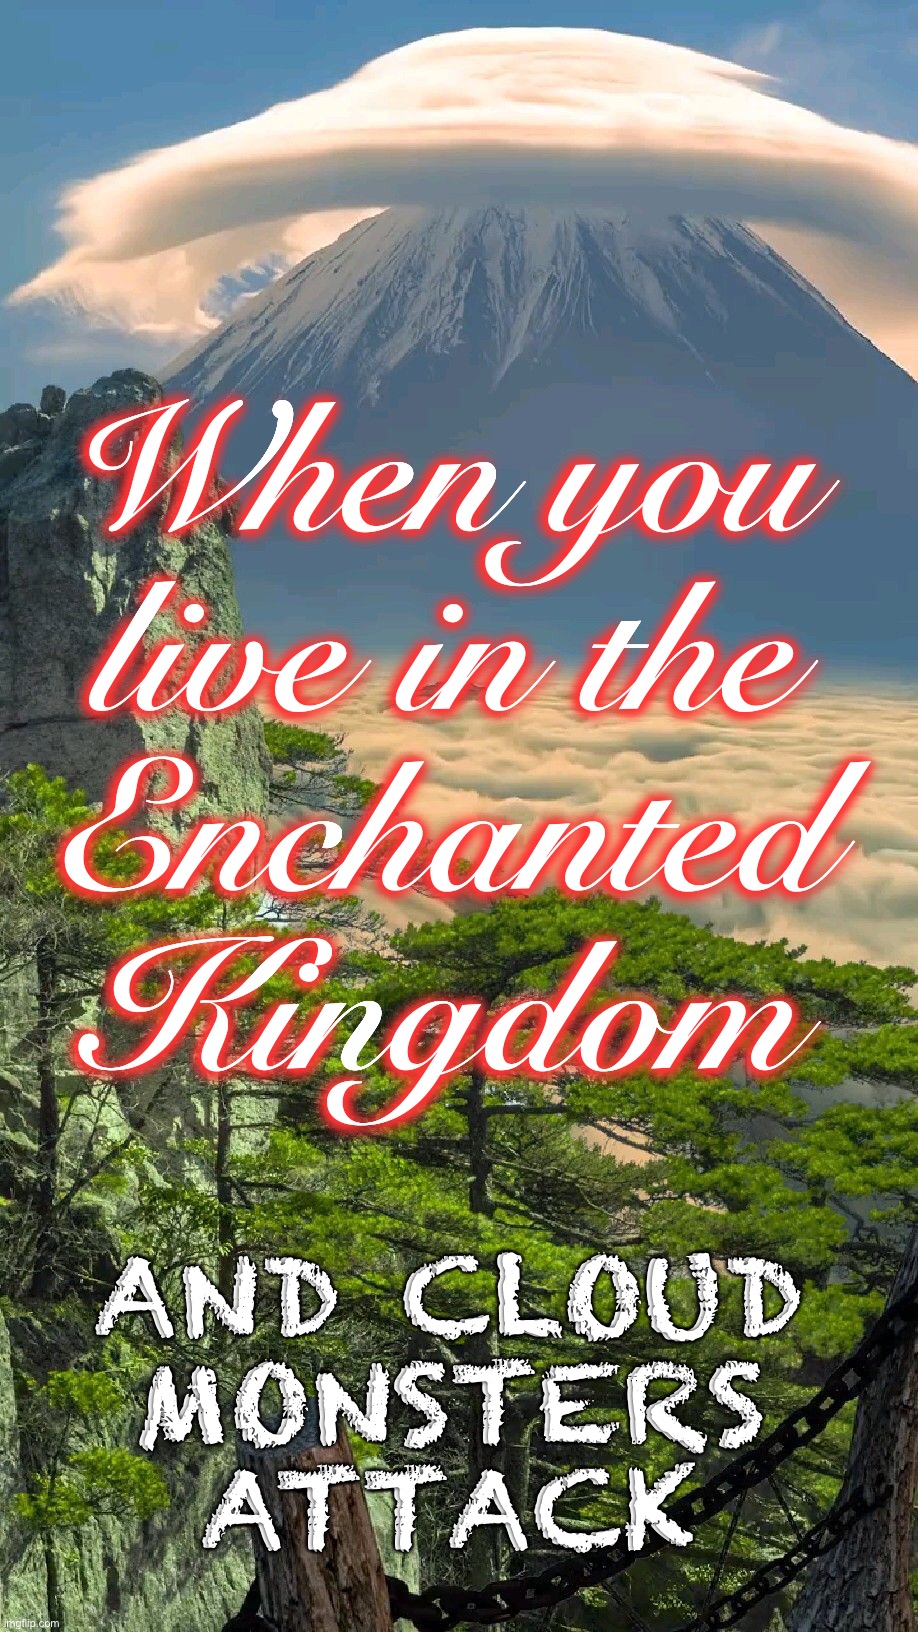 Oh, the Enchanted Kingdom! | When you
live in the
Enchanted
Kingdom; AND CLOUD
MONSTERS
ATTACK | image tagged in fairy tail,monsters,dark humor,rick75230,enchanted,clouds | made w/ Imgflip meme maker